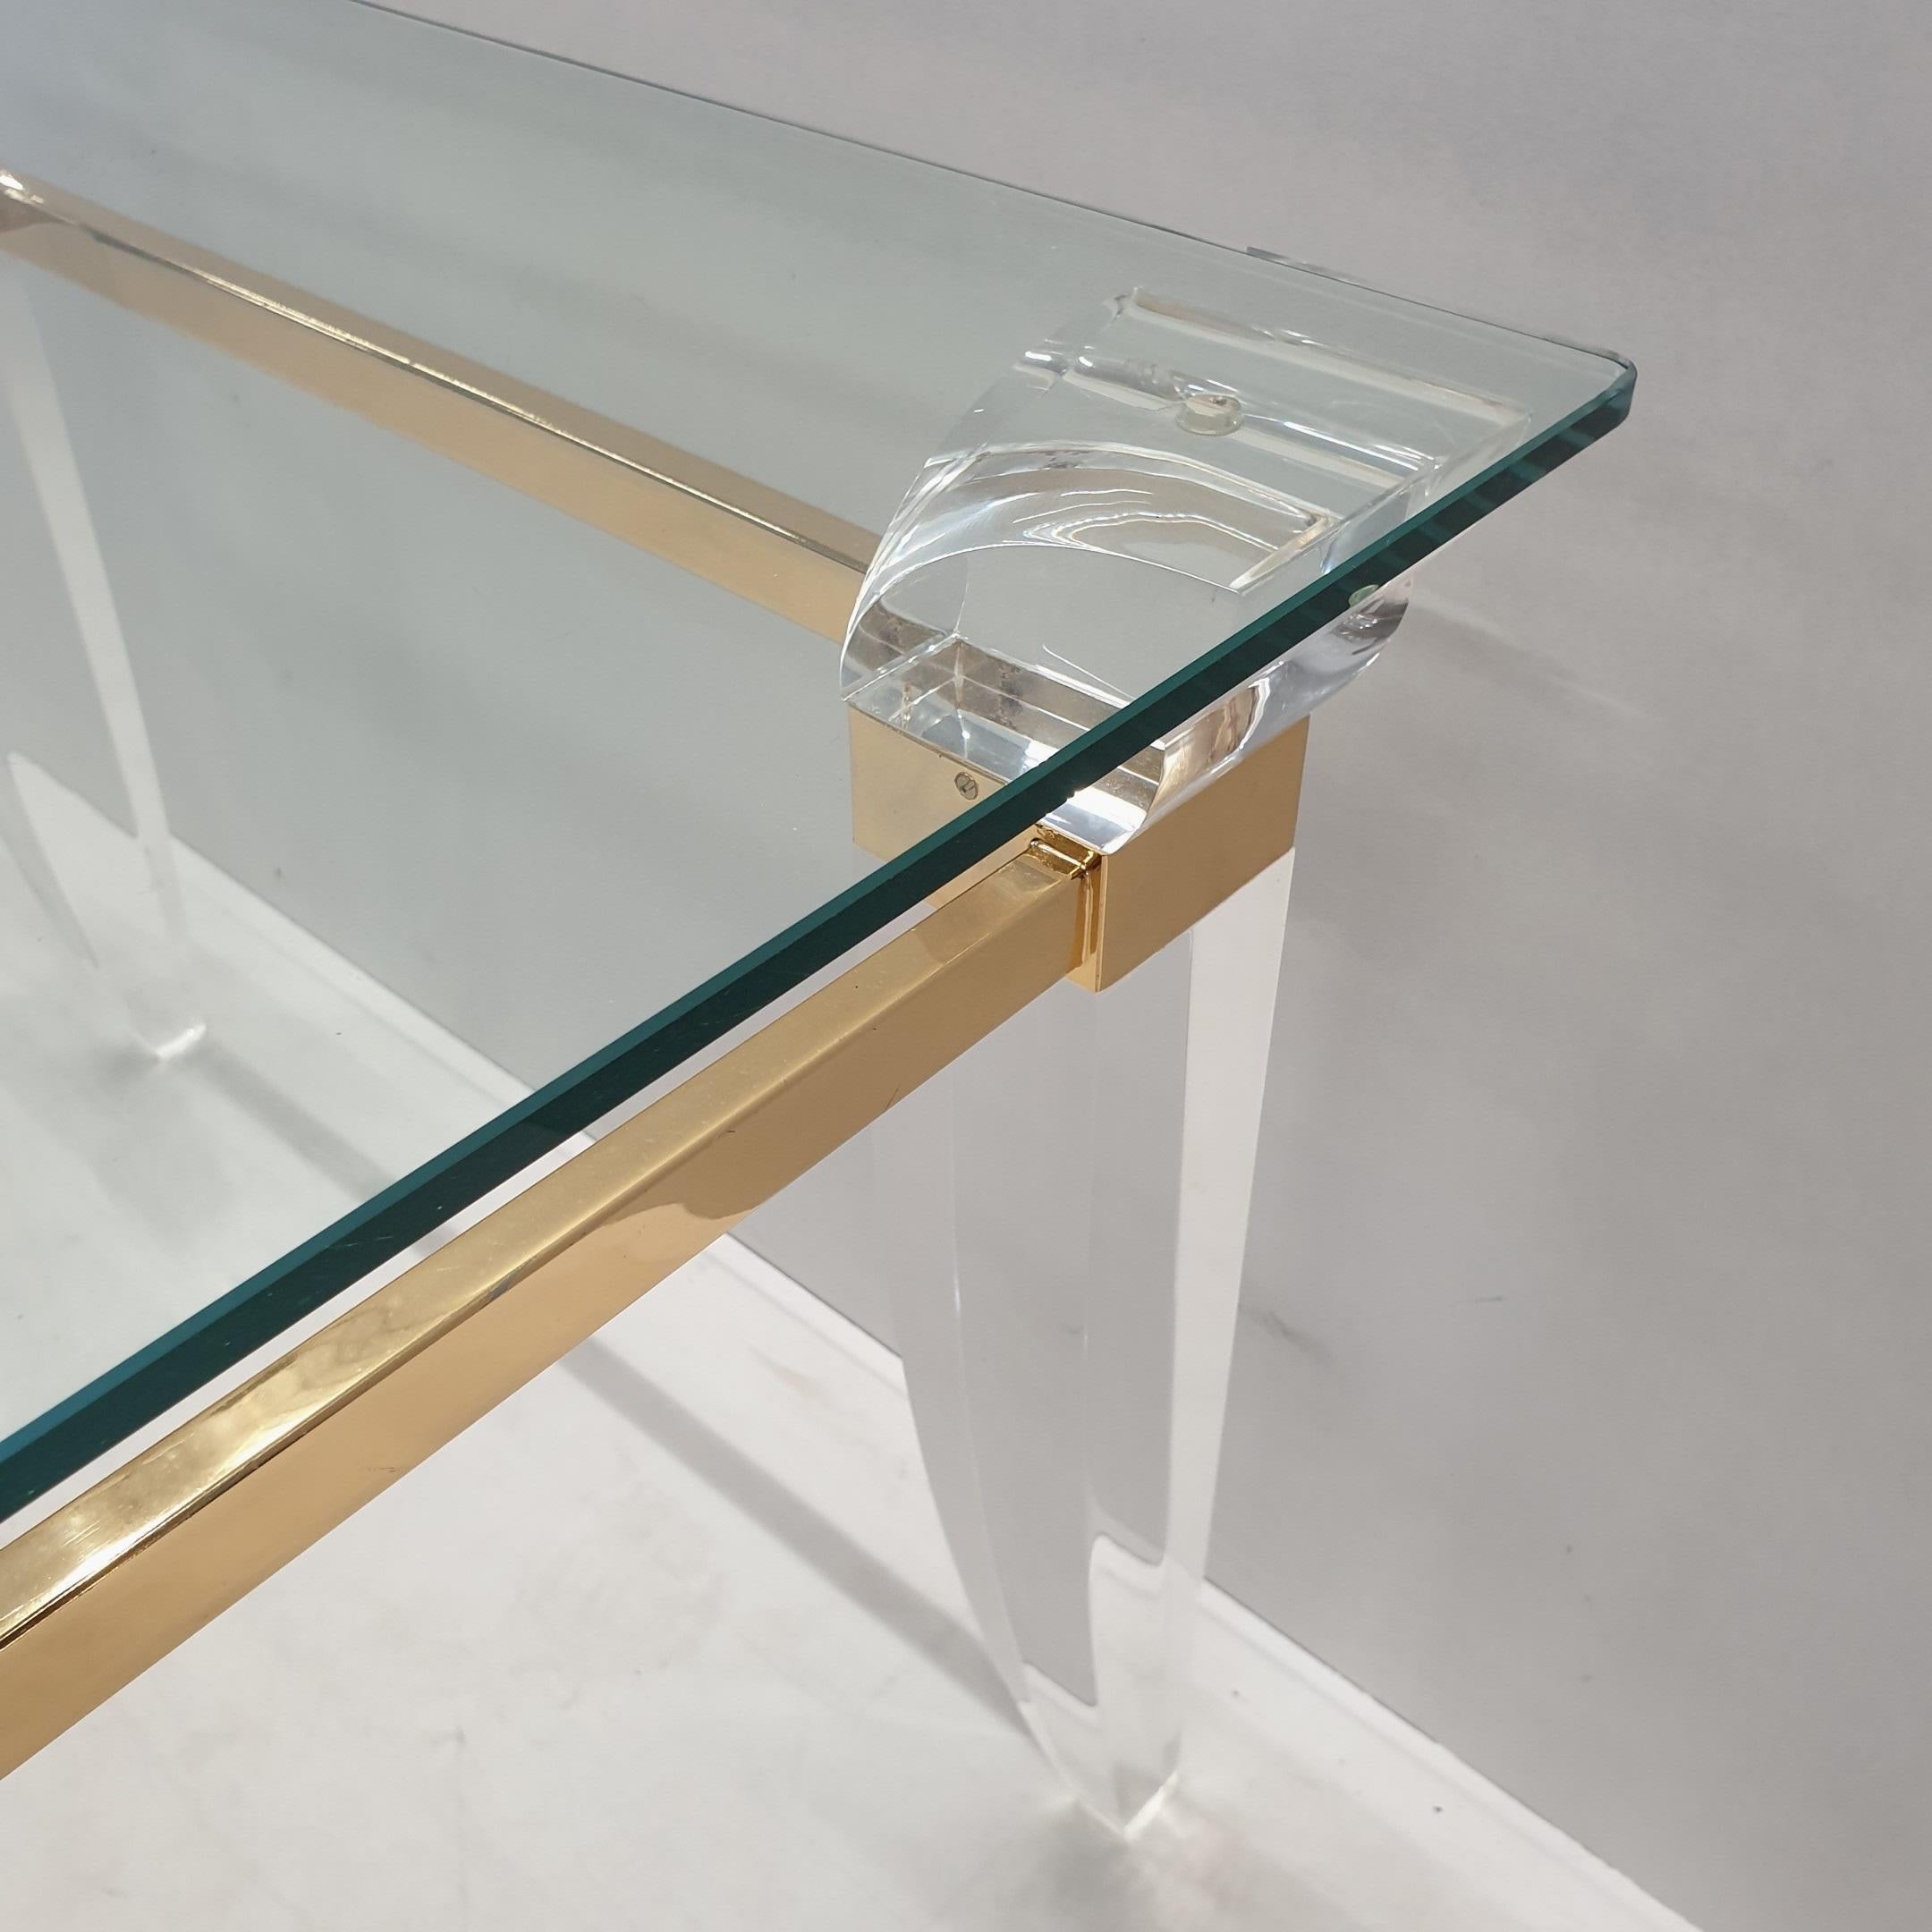 Lucite, Gold Plating and Glass Coffee Table with Assymetrical Table Legs, 1980s For Sale 1